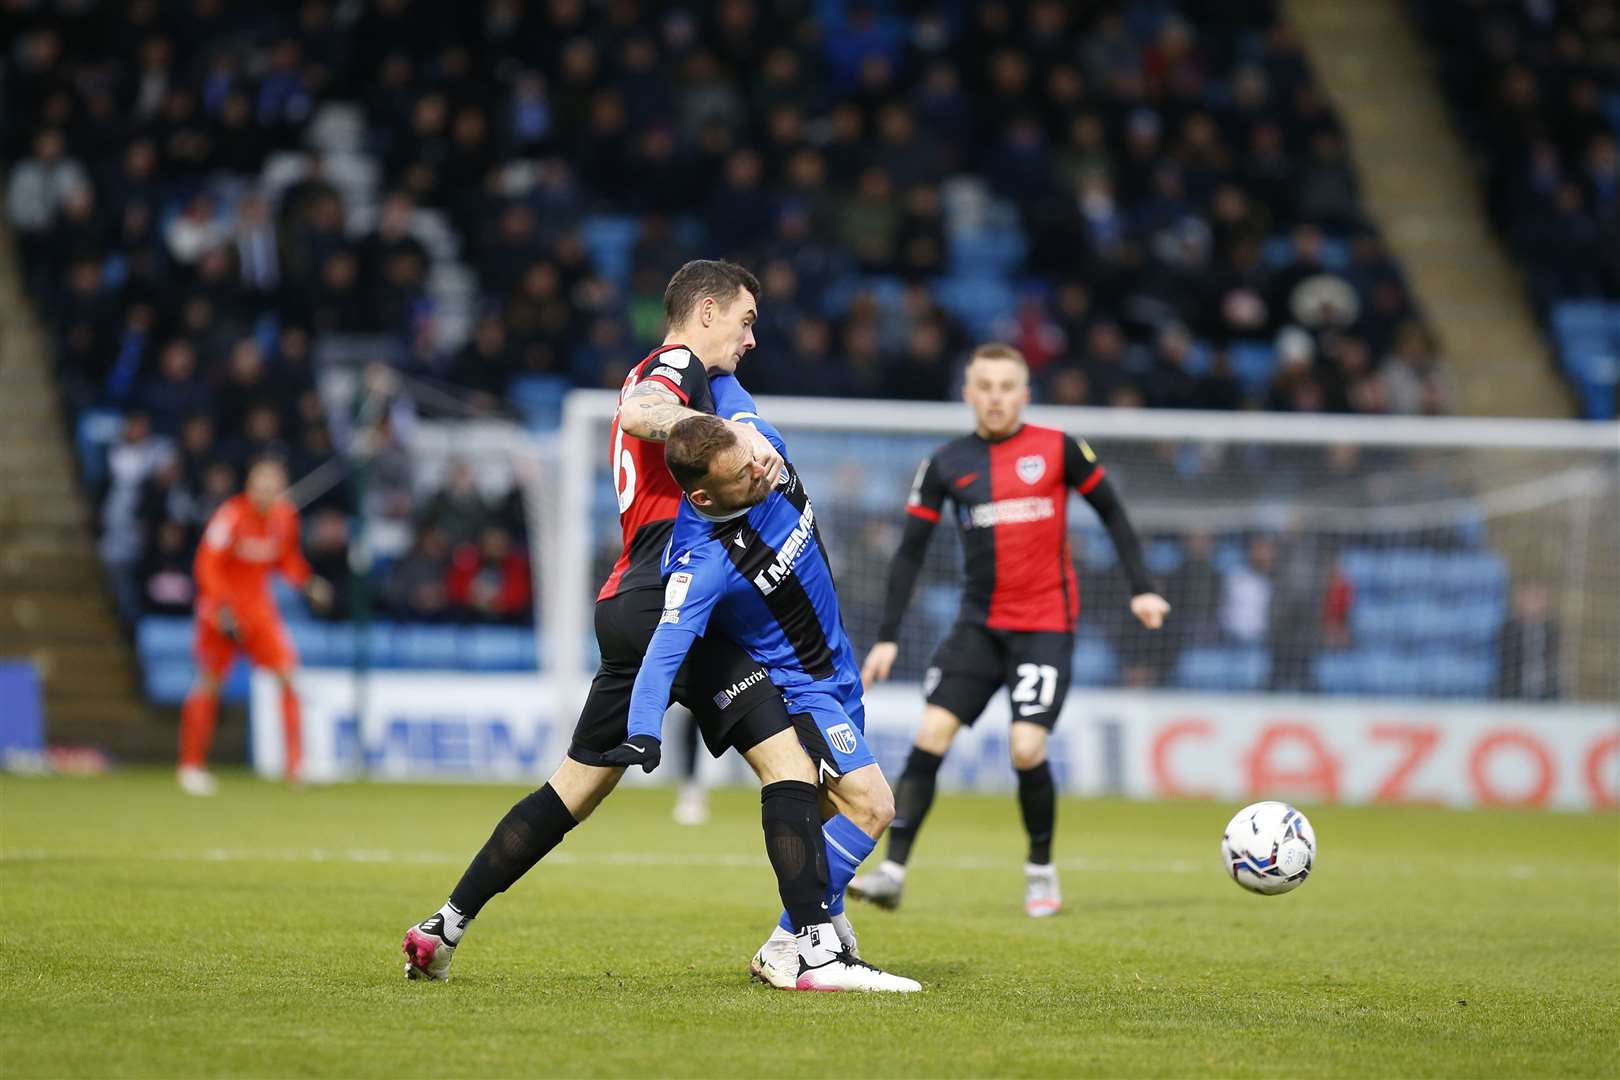 Match action between Gillingham and Portsmouth Picture: Andy Jones